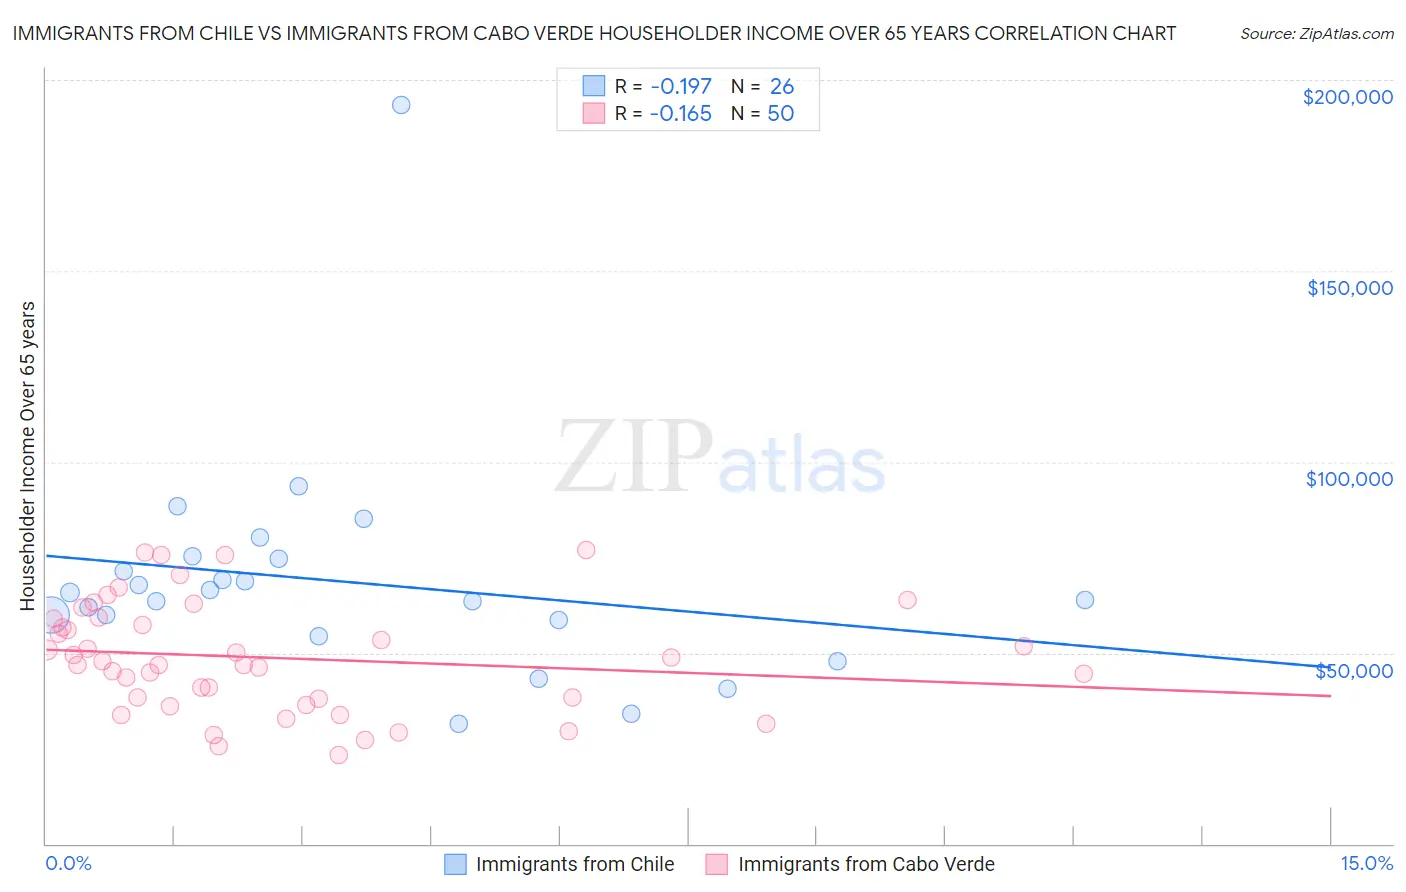 Immigrants from Chile vs Immigrants from Cabo Verde Householder Income Over 65 years